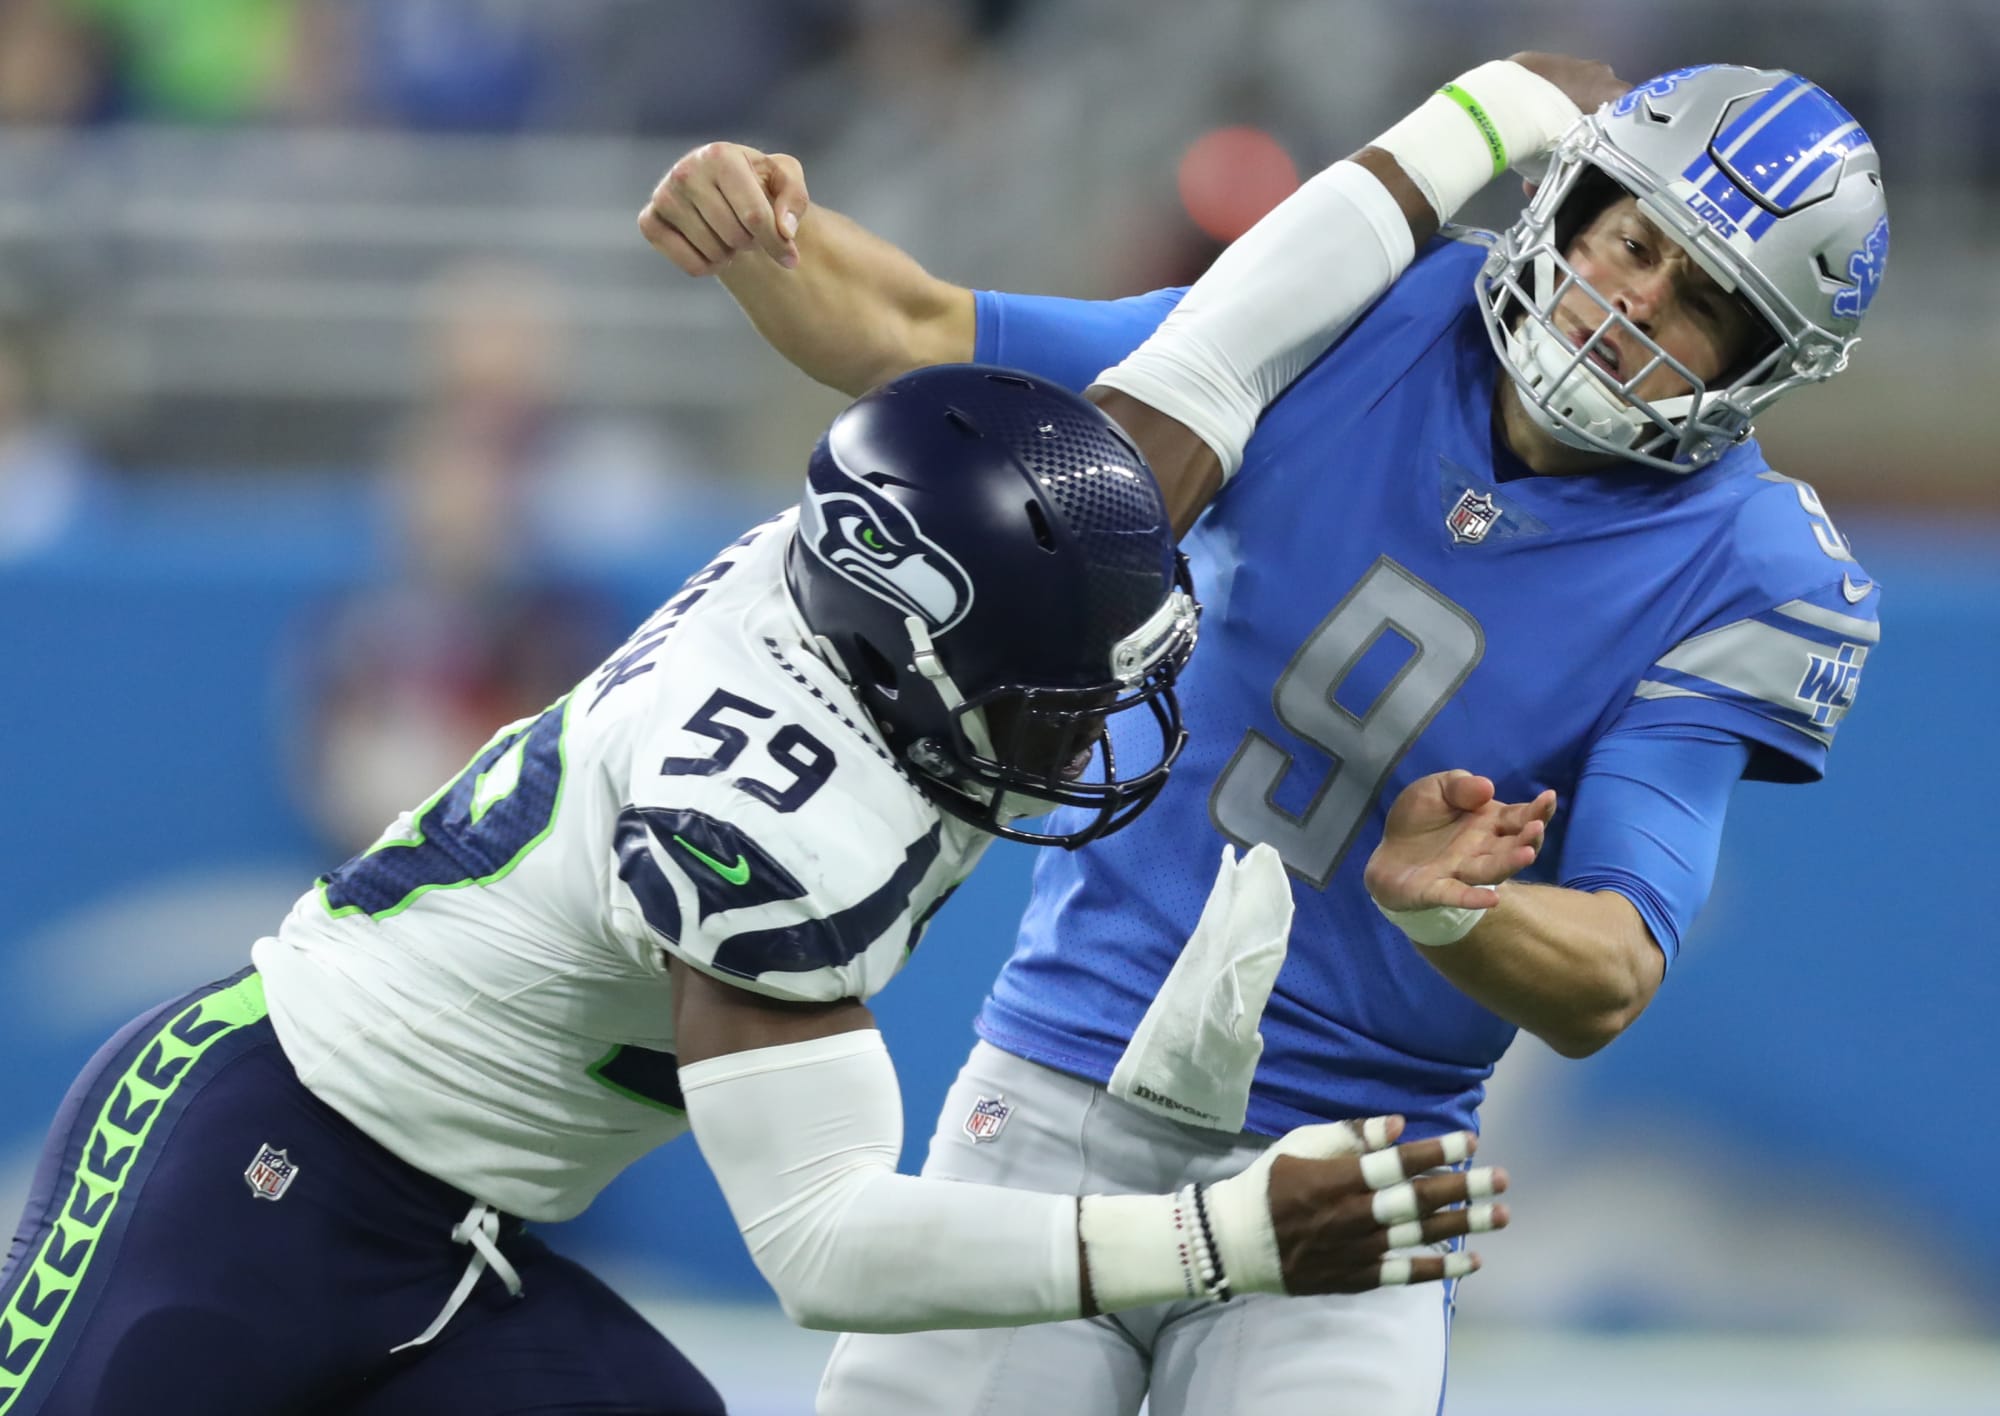 Lions vs. Seahawks Mistakes cripple Detroit at home in loss